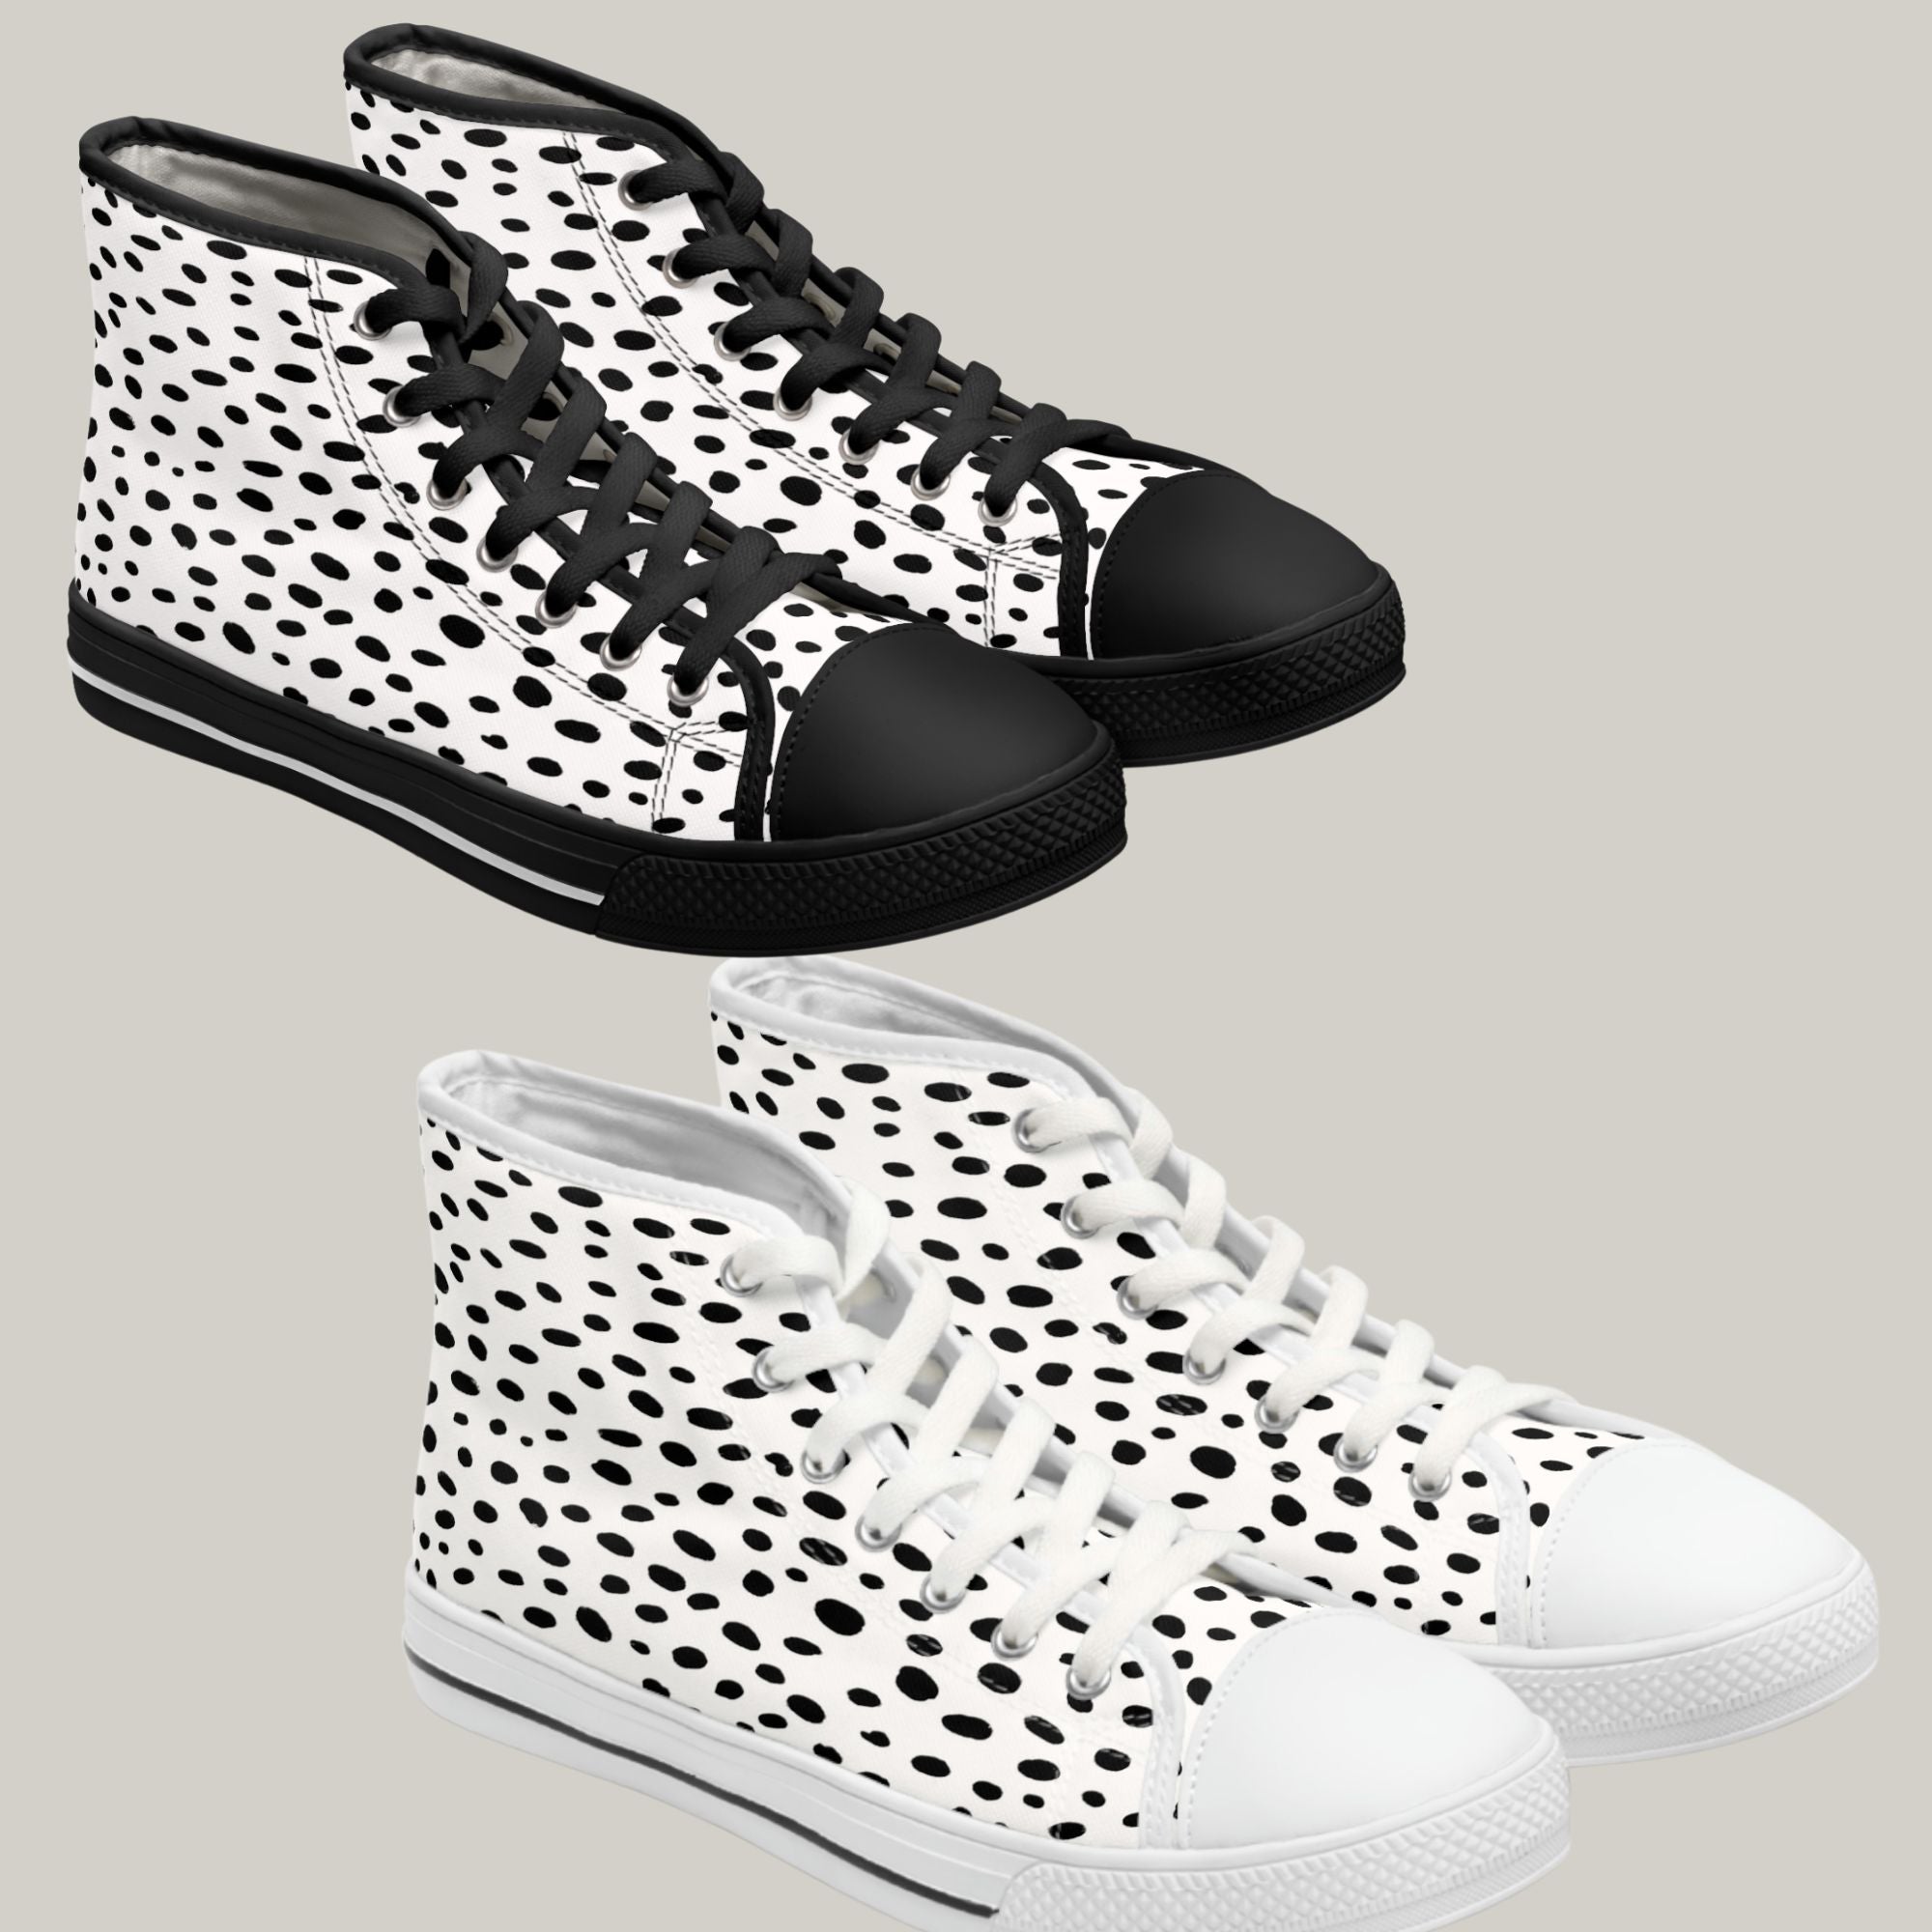 DALMATIAN & WHITE - Women's High Top Sneakers Black and White soles